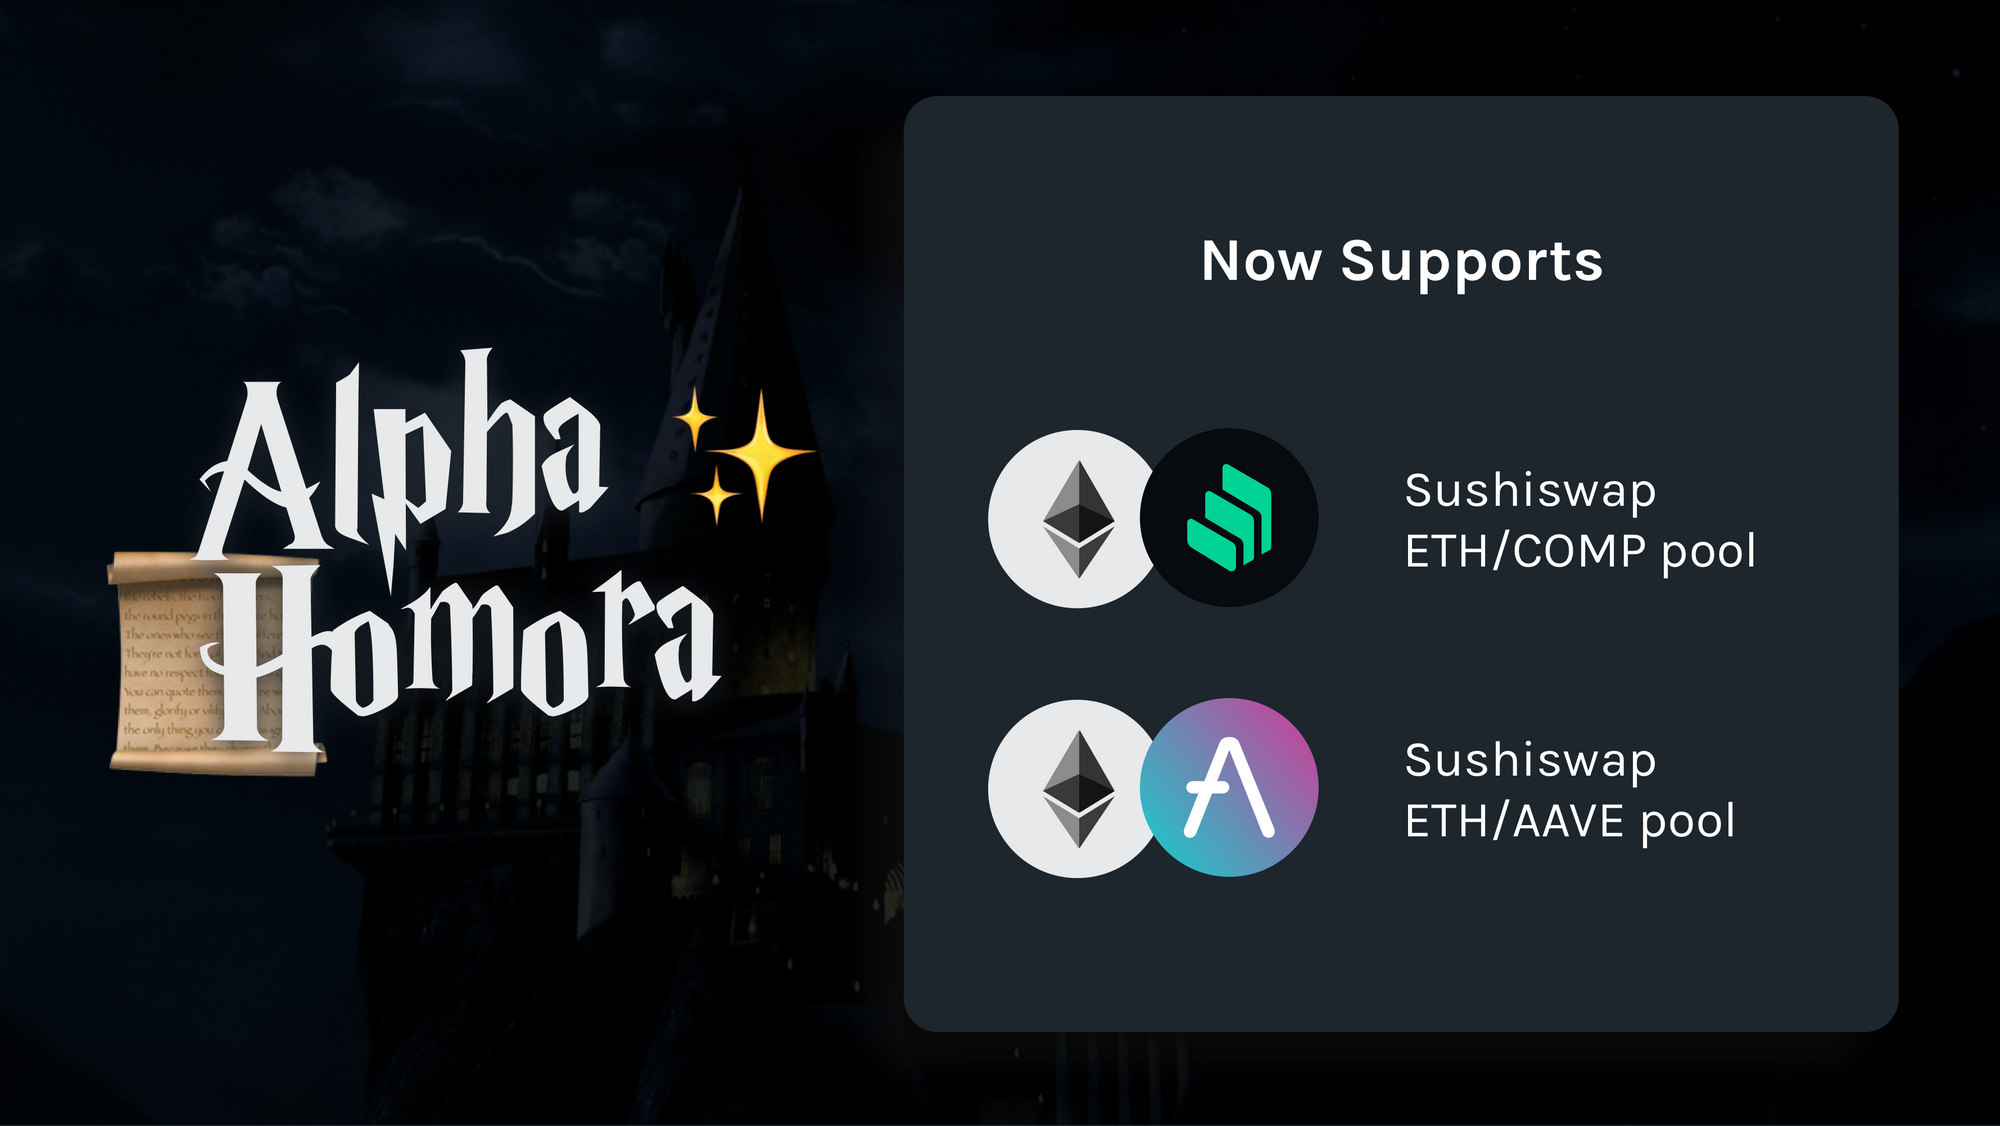 Alpha Homora adds leveraged yield farming for ETH/COMP and ETH/AAVE pools on SushiSwap